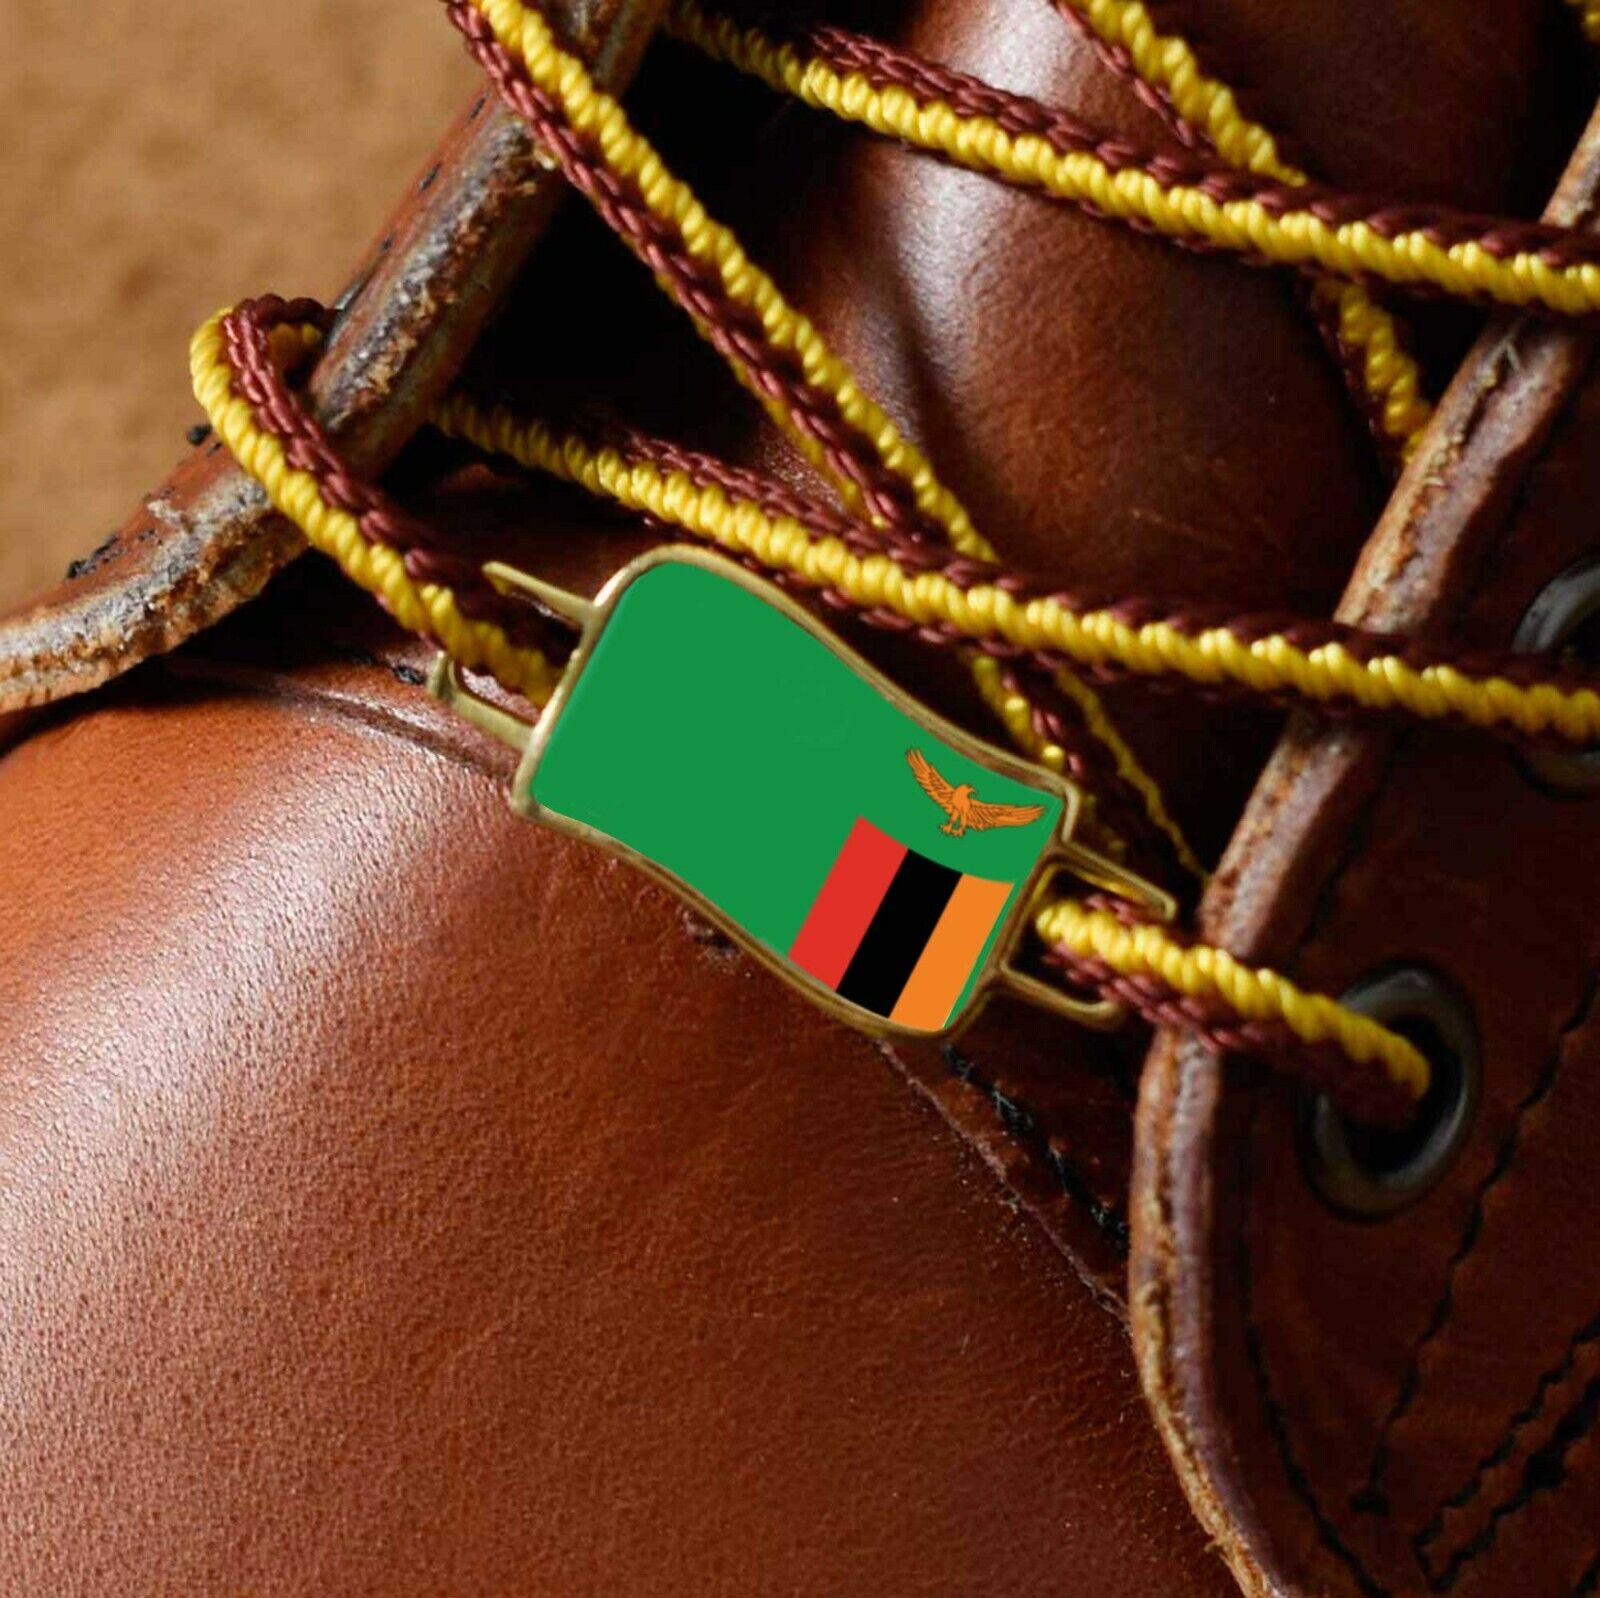 Zambia Flags Shoes Boot Shoelace Keeper Holder Charm BrooklynMaker